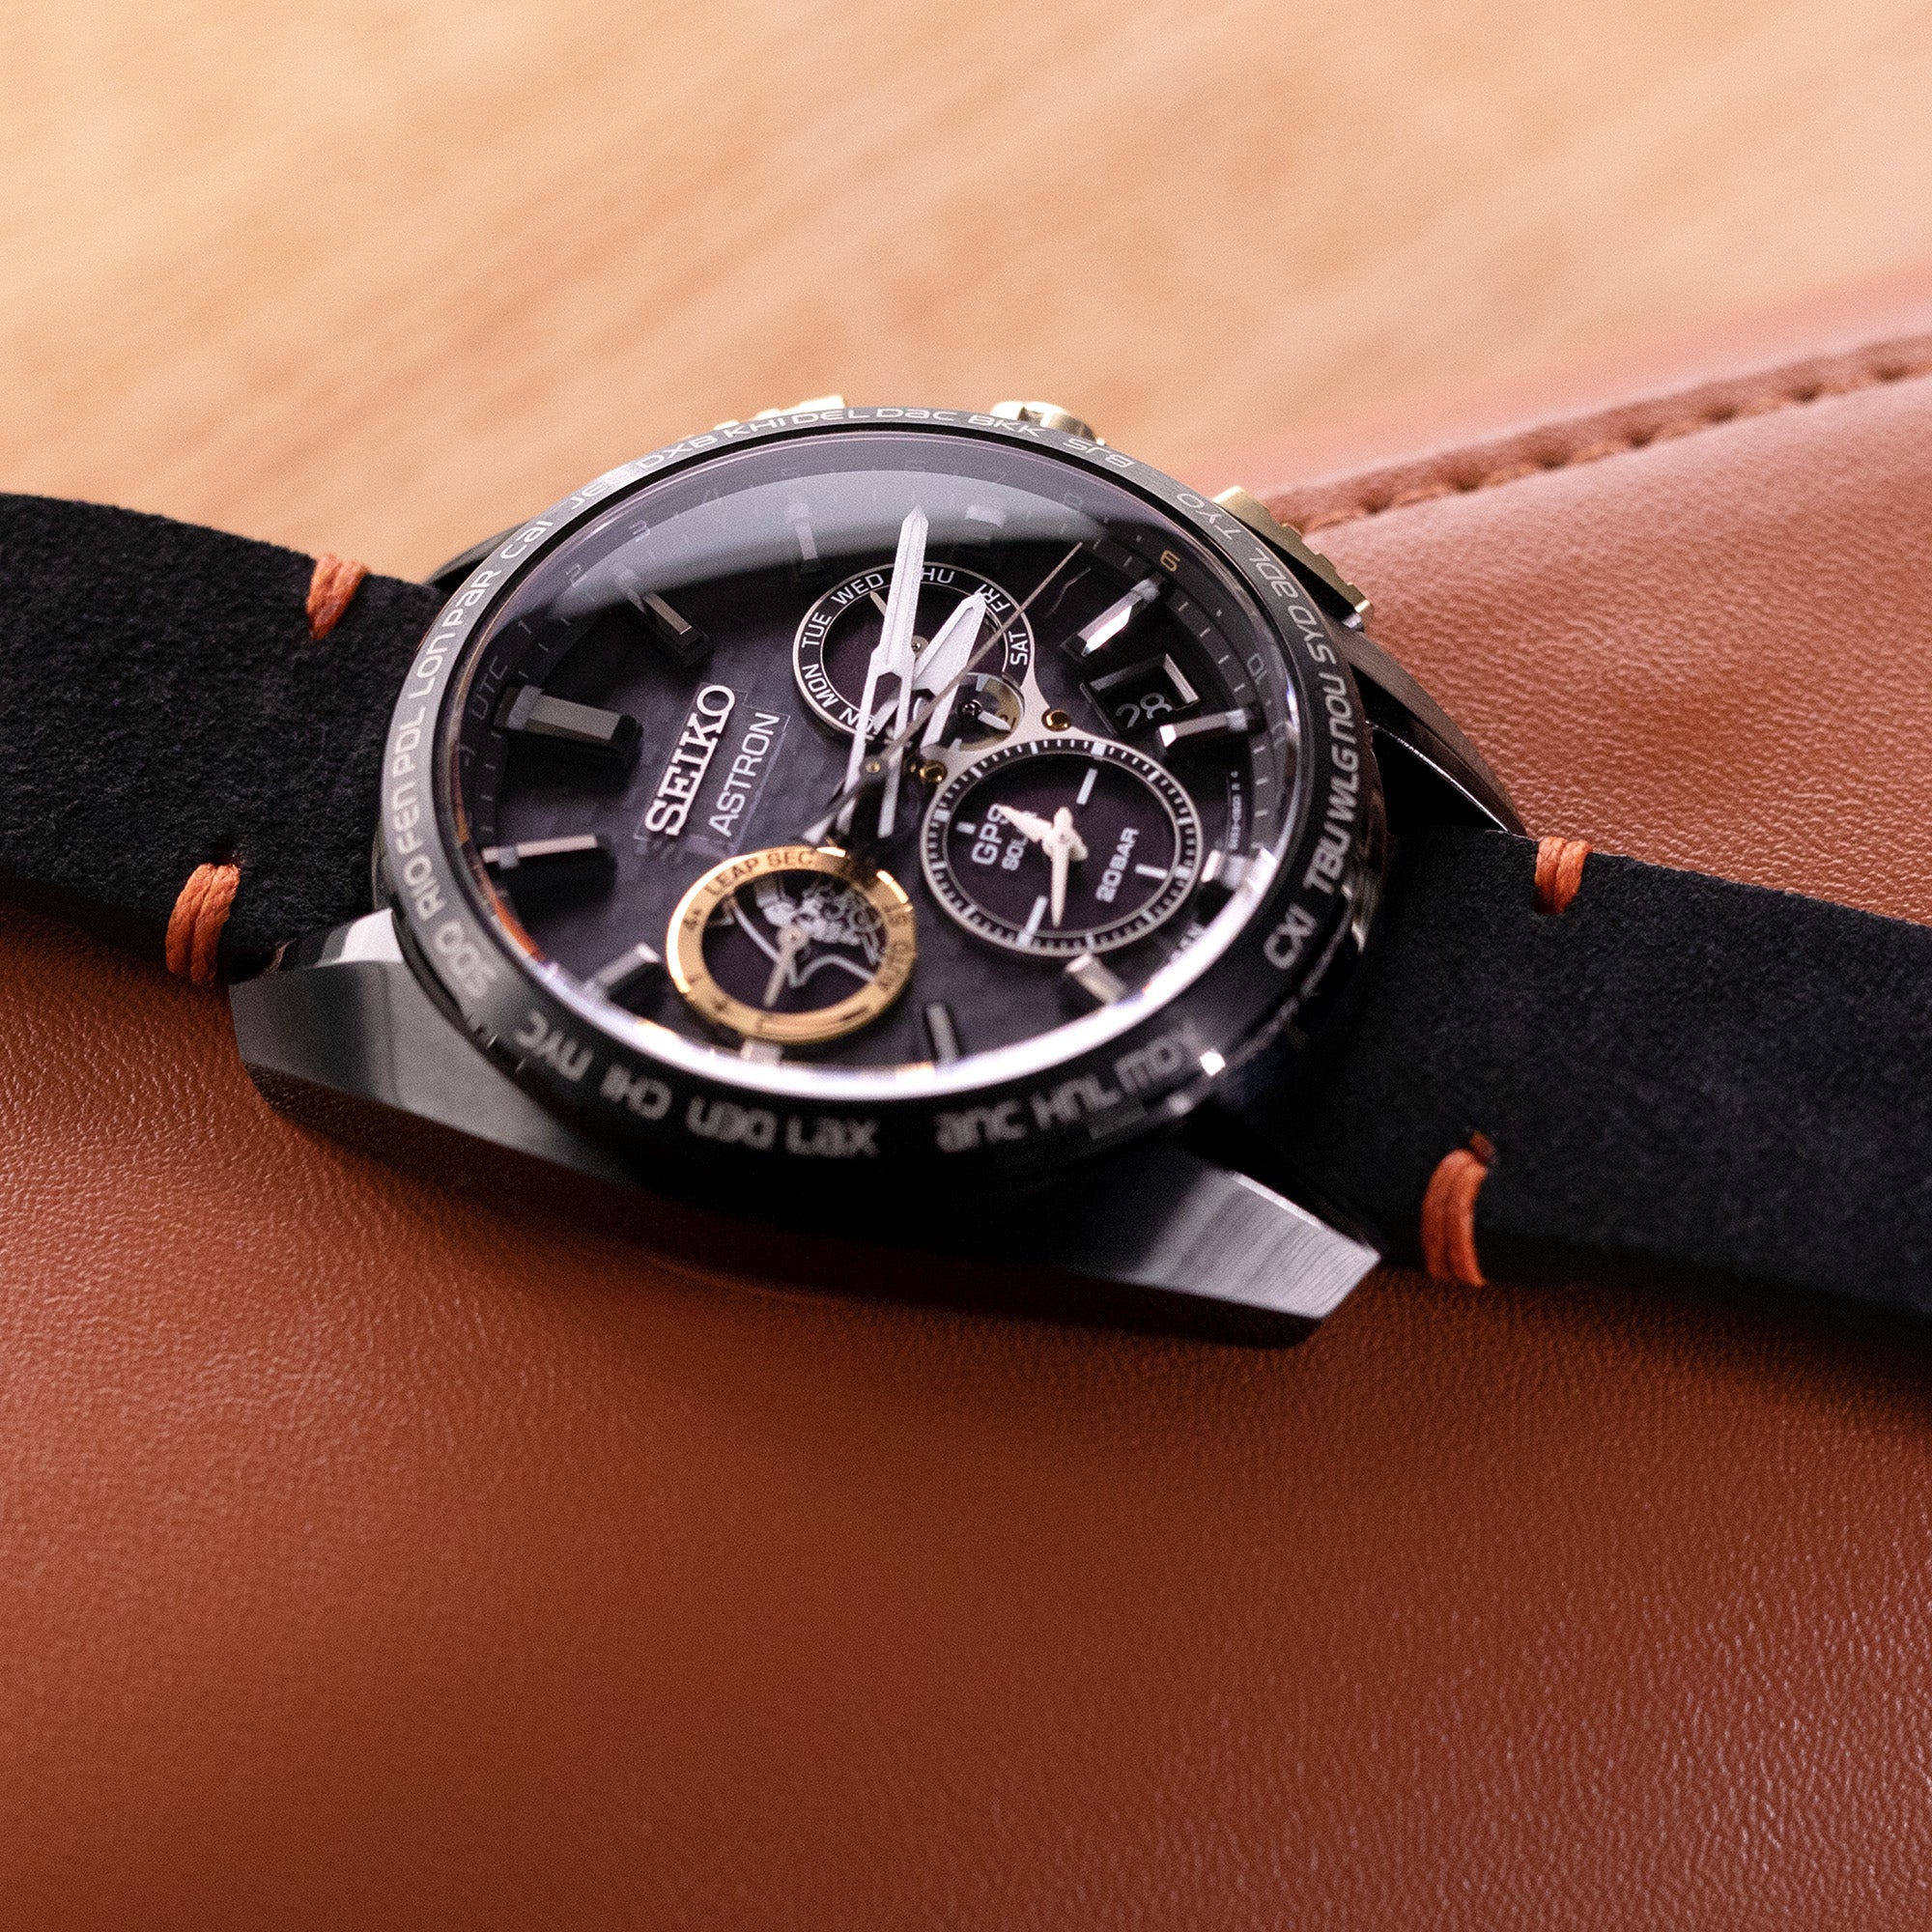 21mm Black Quick Release Italian Suede Leather Watch Strap Orange St. Strapcode Watch Bands